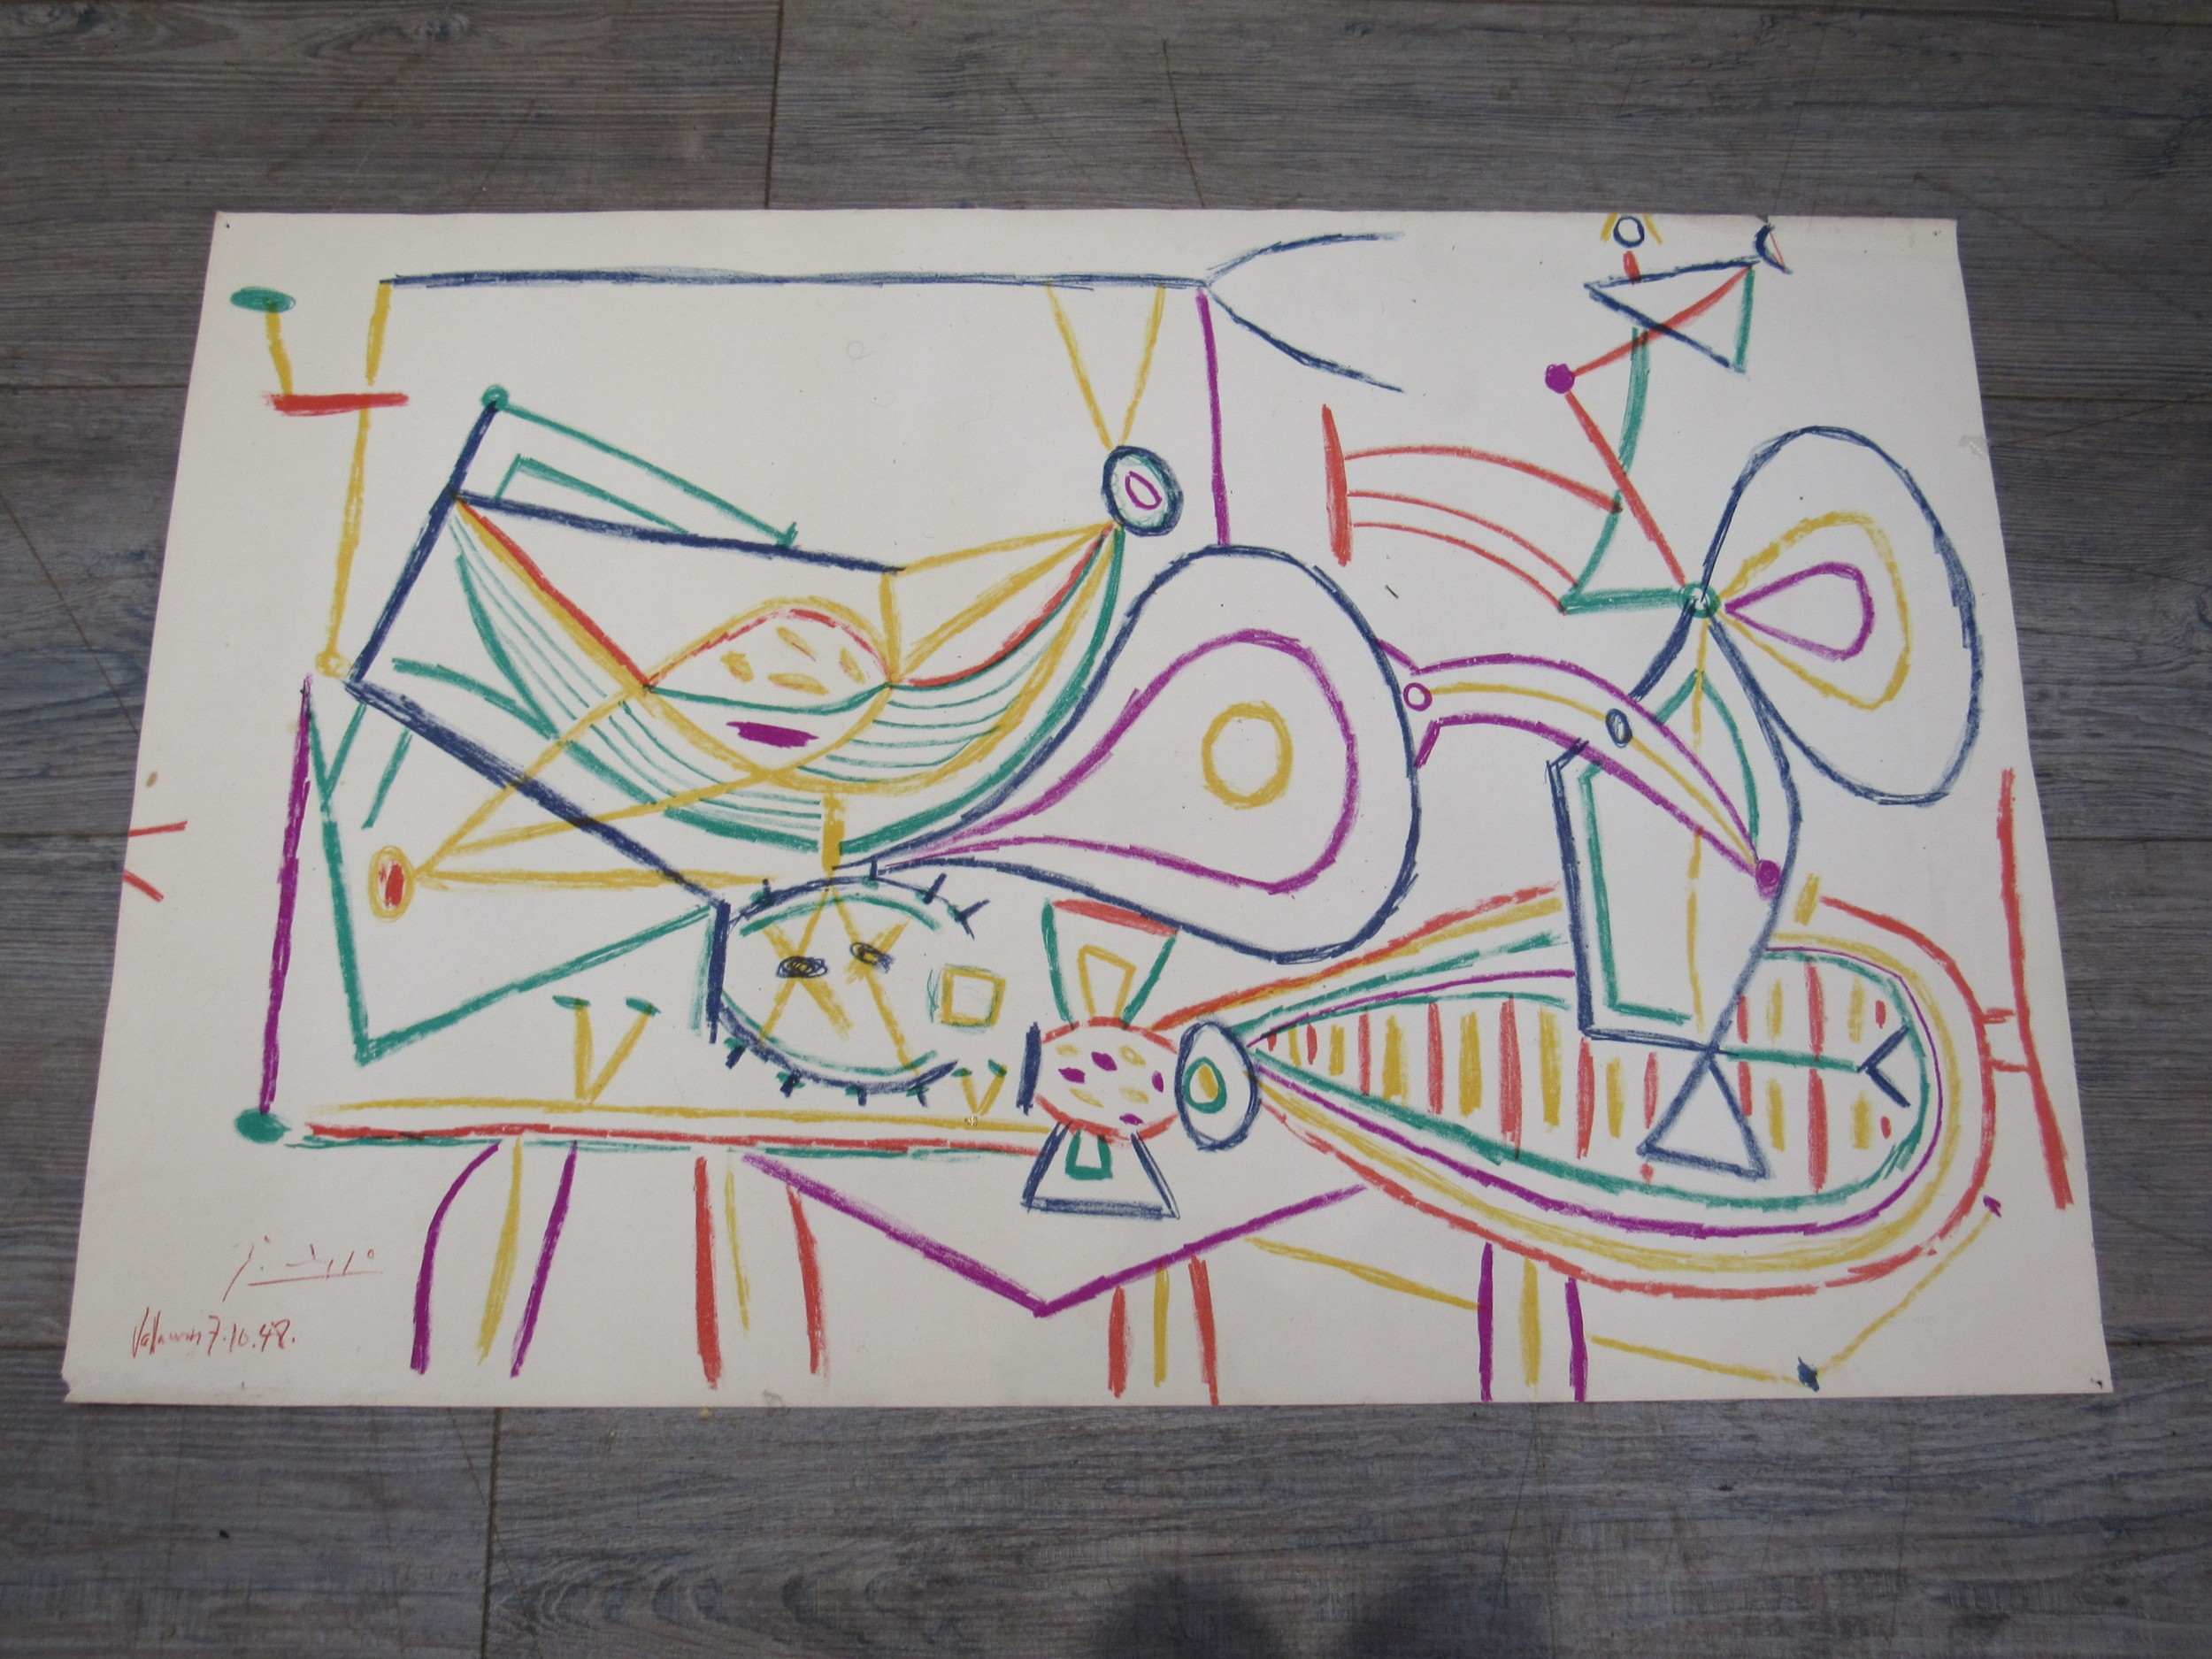 After Pablo Picasso - Schools Prints compostion lithograph, 1948, signed in the print. Unframed.